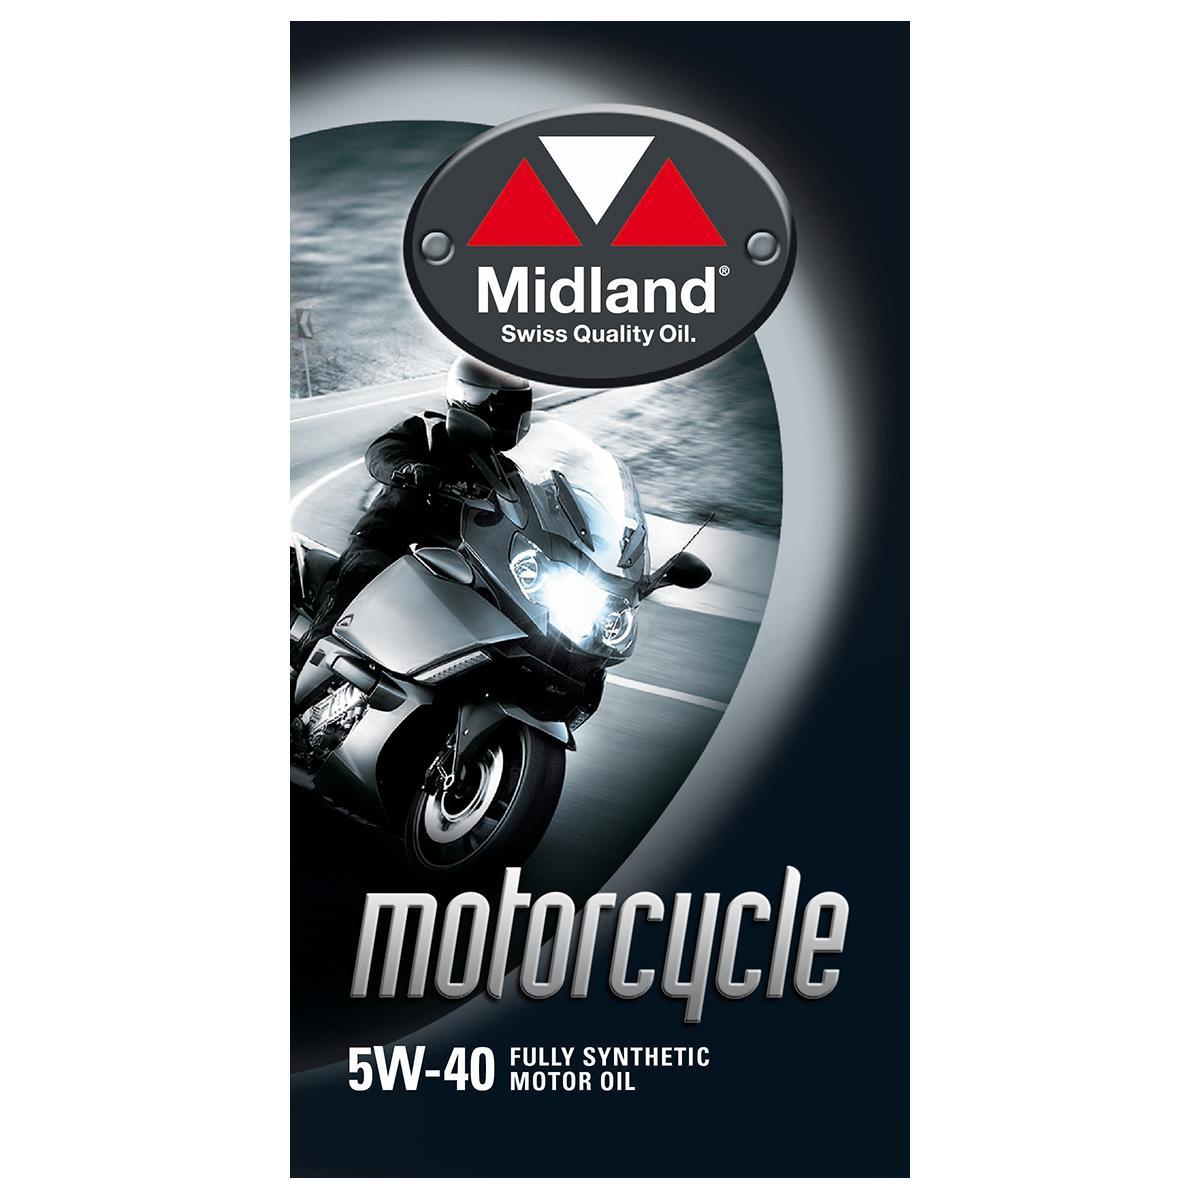 Motorcycle 5W-40